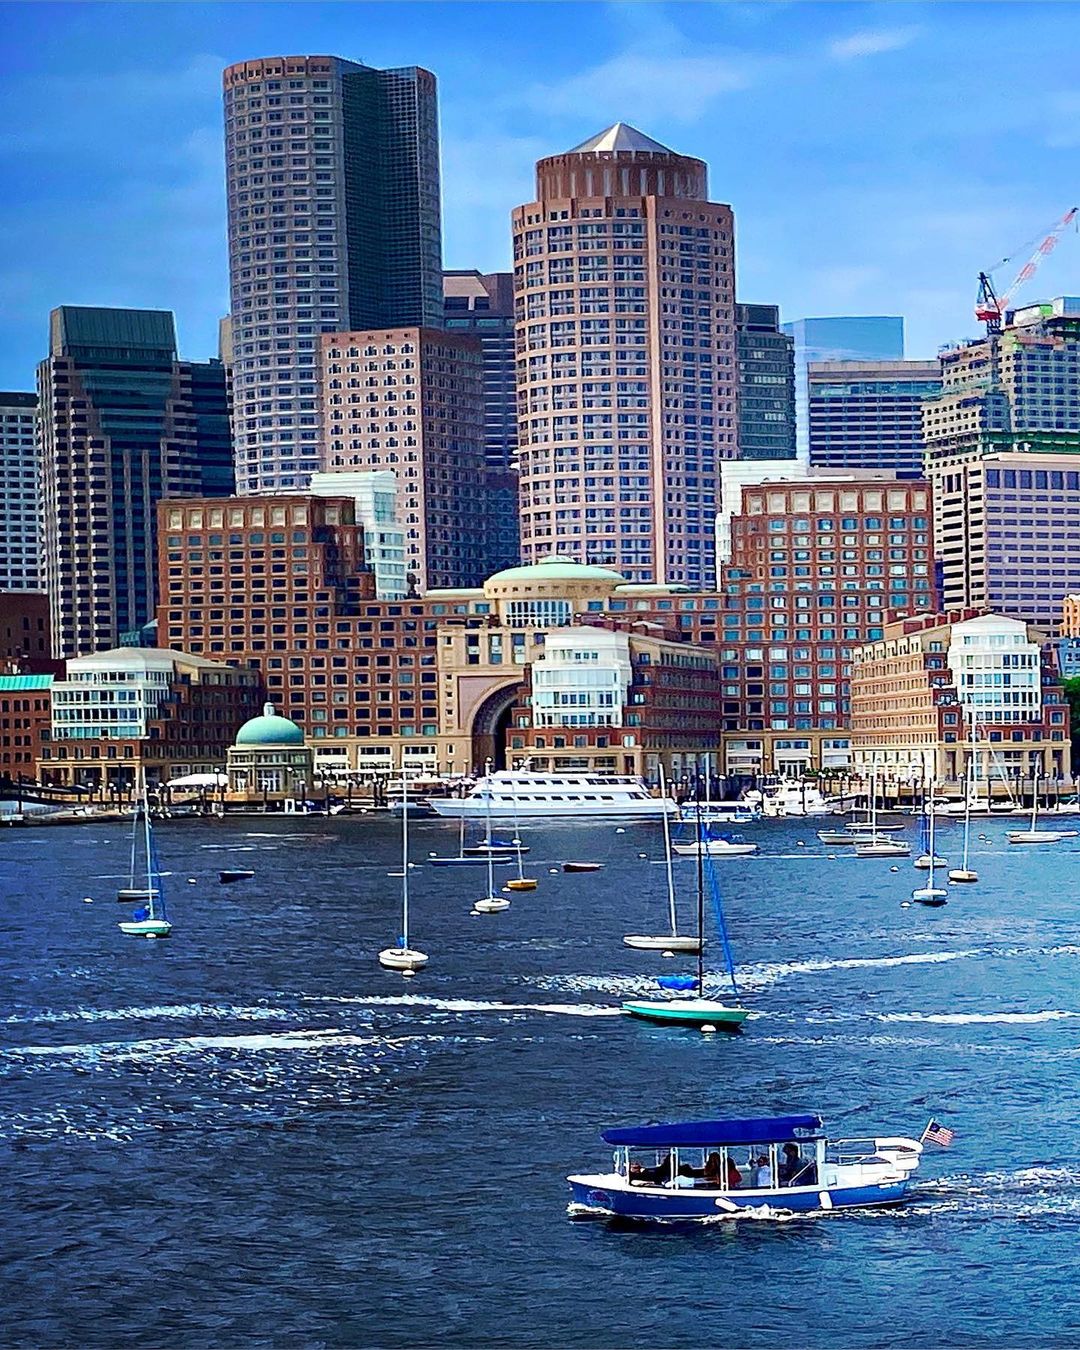 Boston Harbor Filled with Boats During the Day. Photo by Instagram user @rlonpine